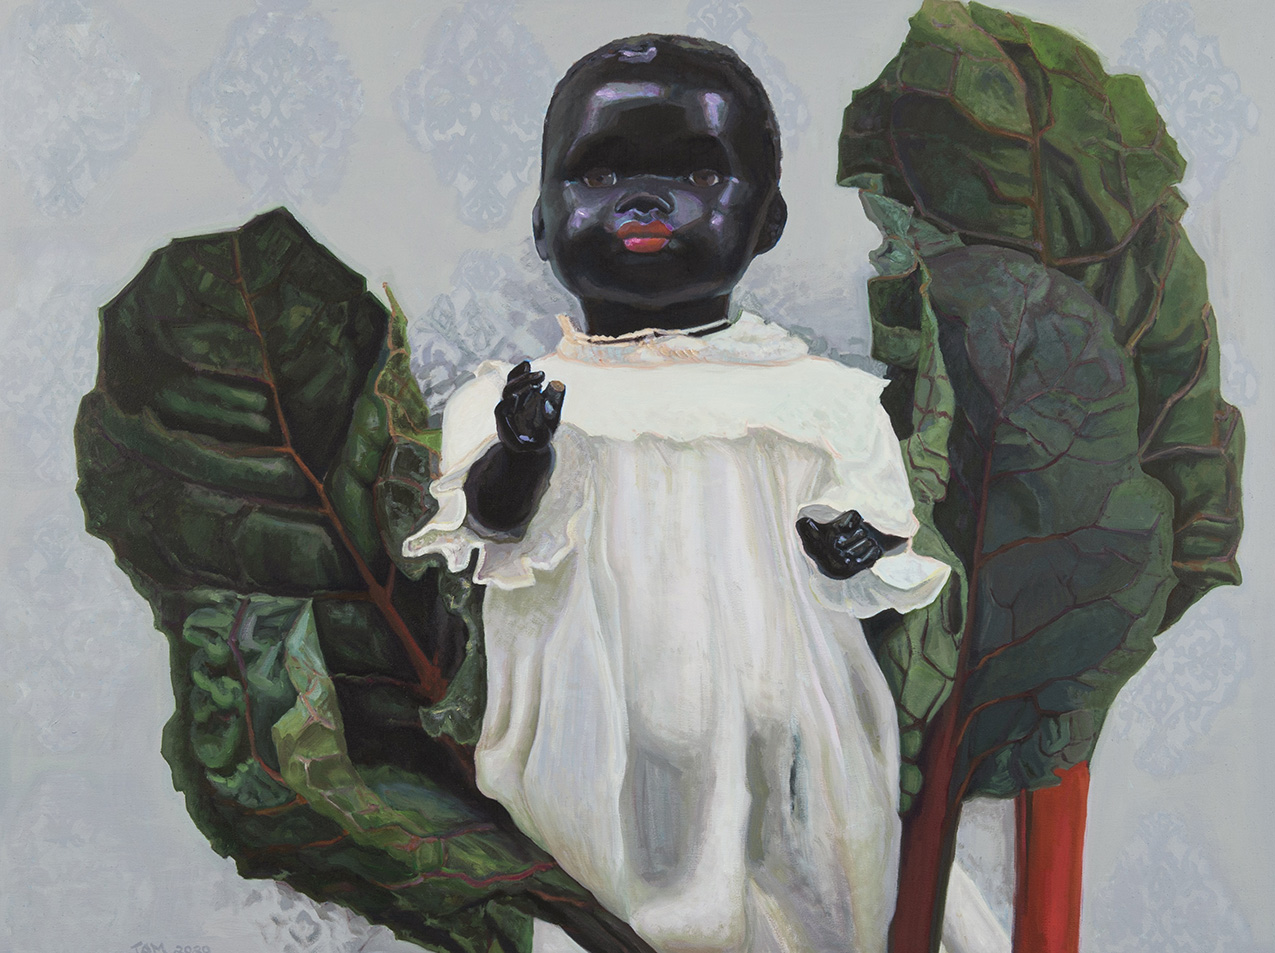 painting of an old Black baby doll with white nightgown and red lips and stalks of swiss chard